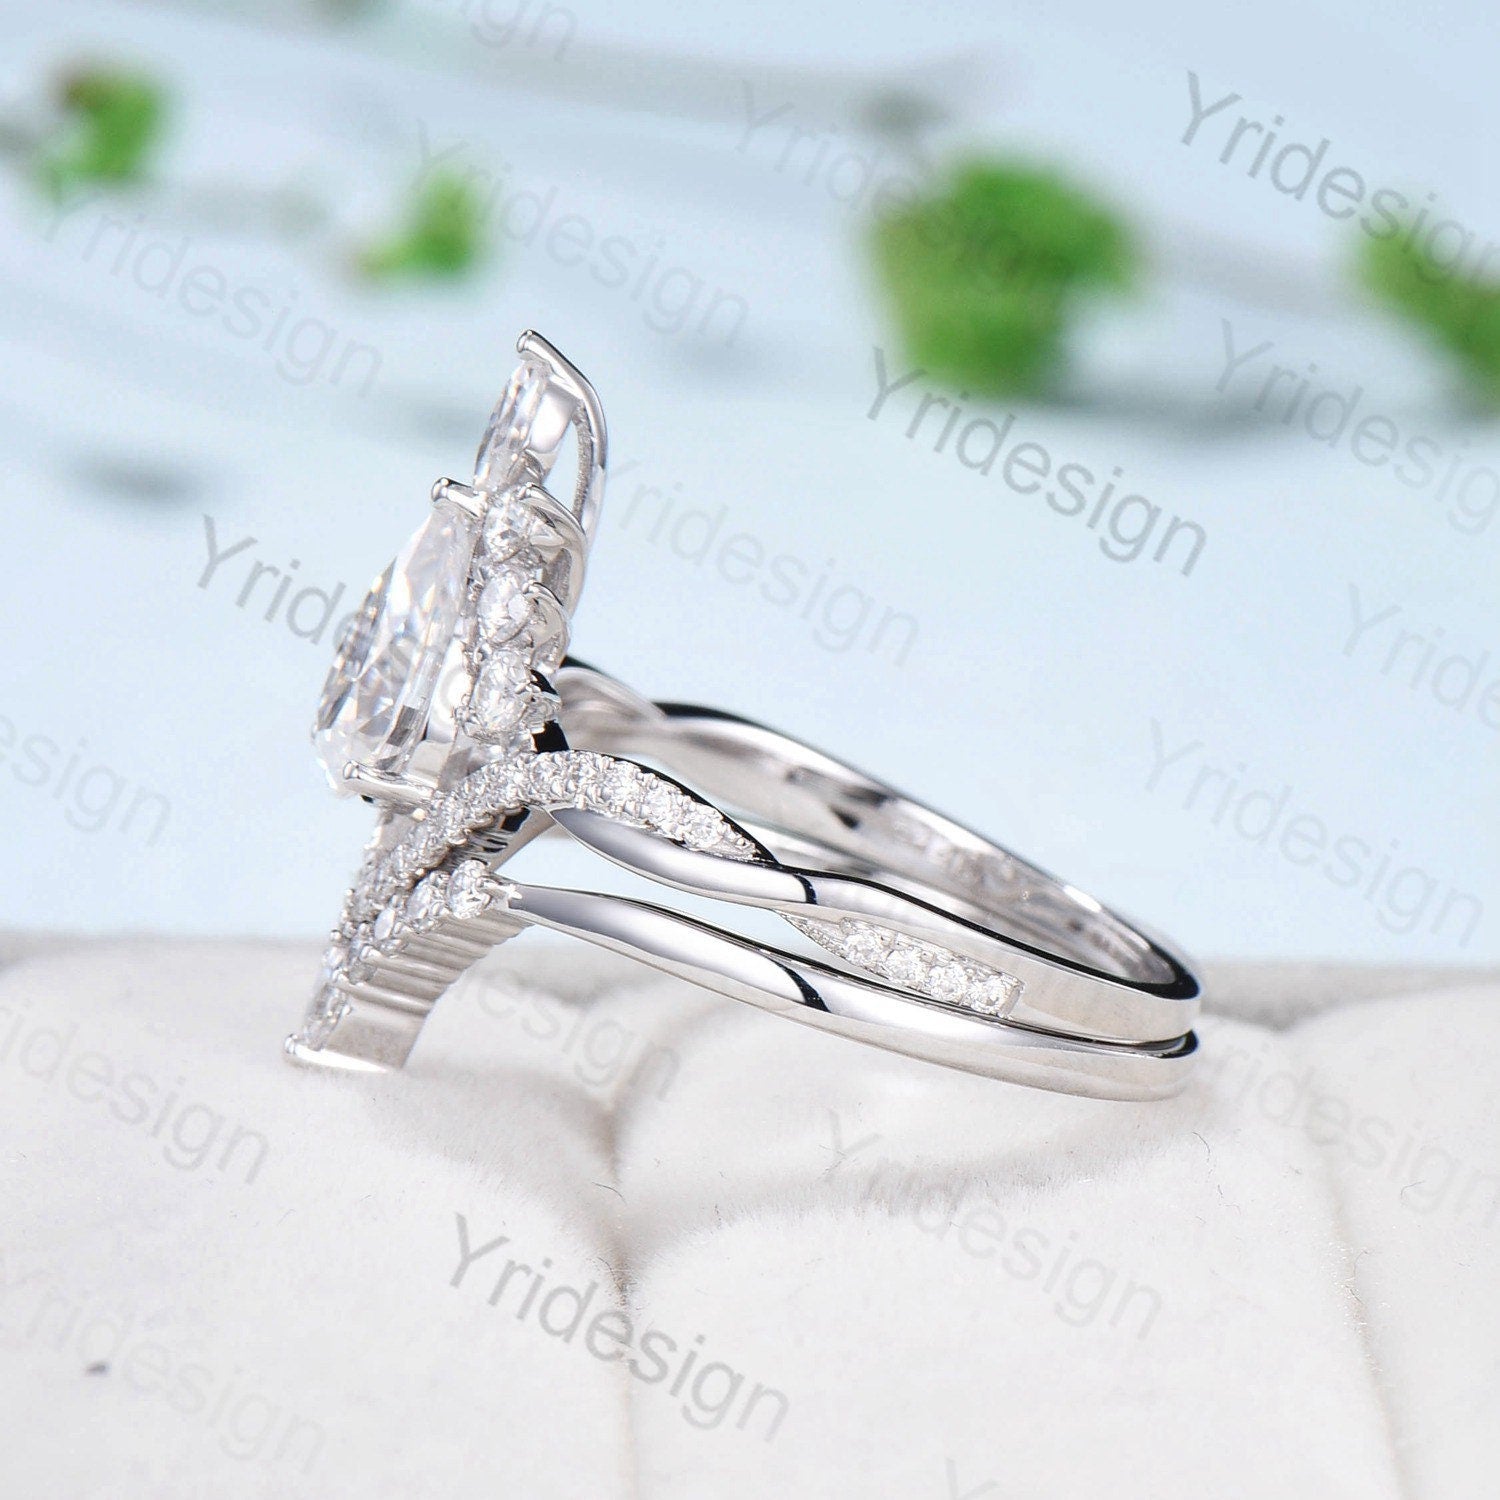 Vintage Retro Moissanite engagement ring set Vintage Pear shaped Moissanite wedding ring set white gold Unique Twisted Promise ring for her - PENFINE